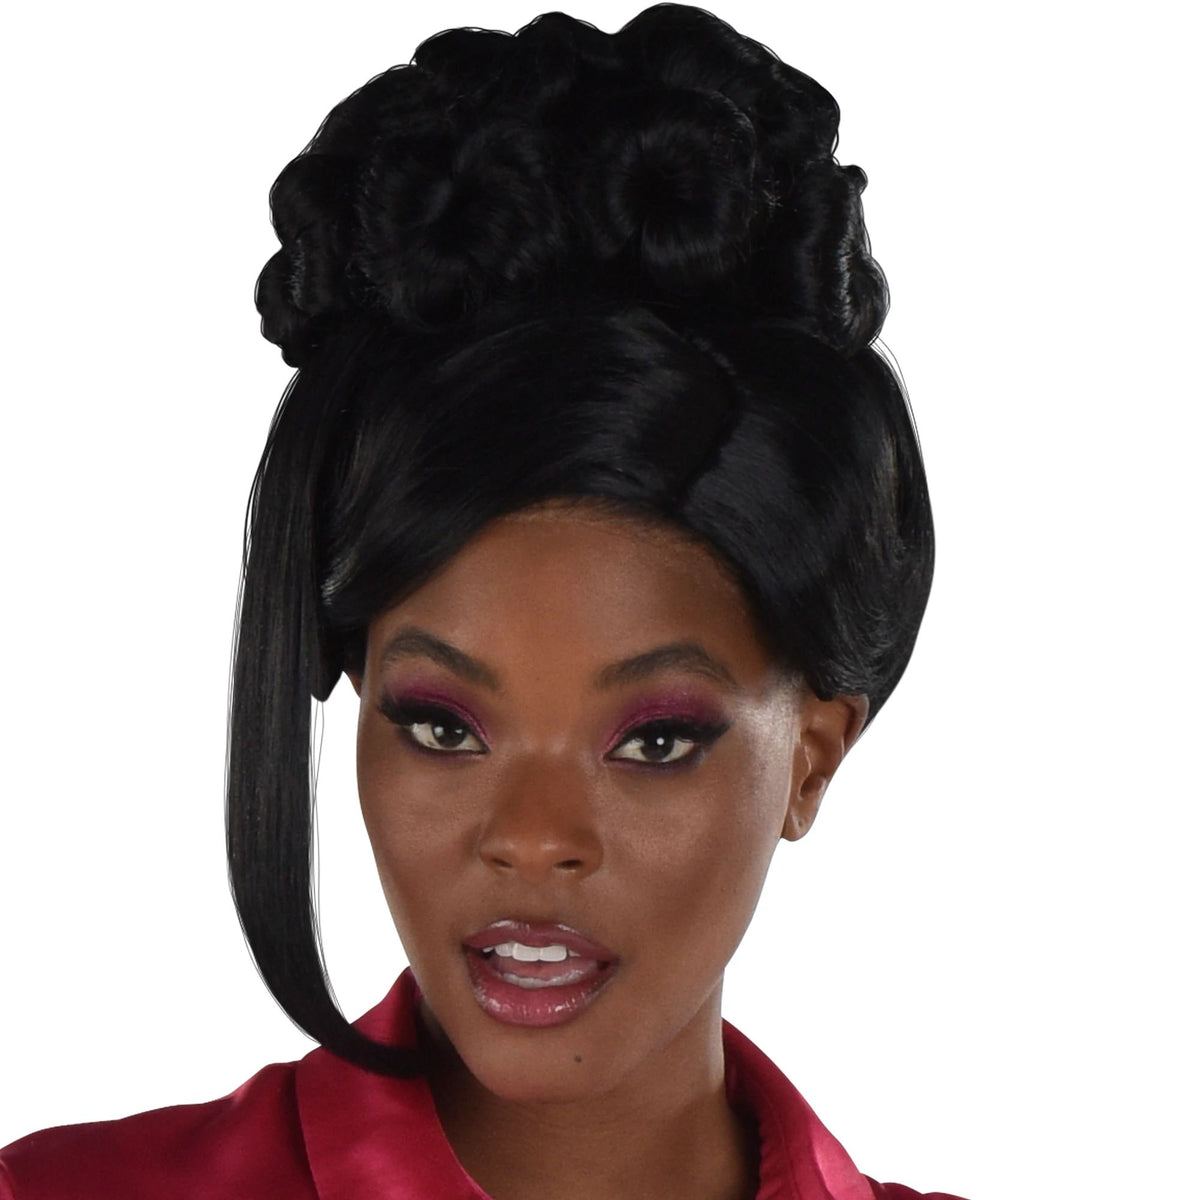 UpDo Wig for Adults